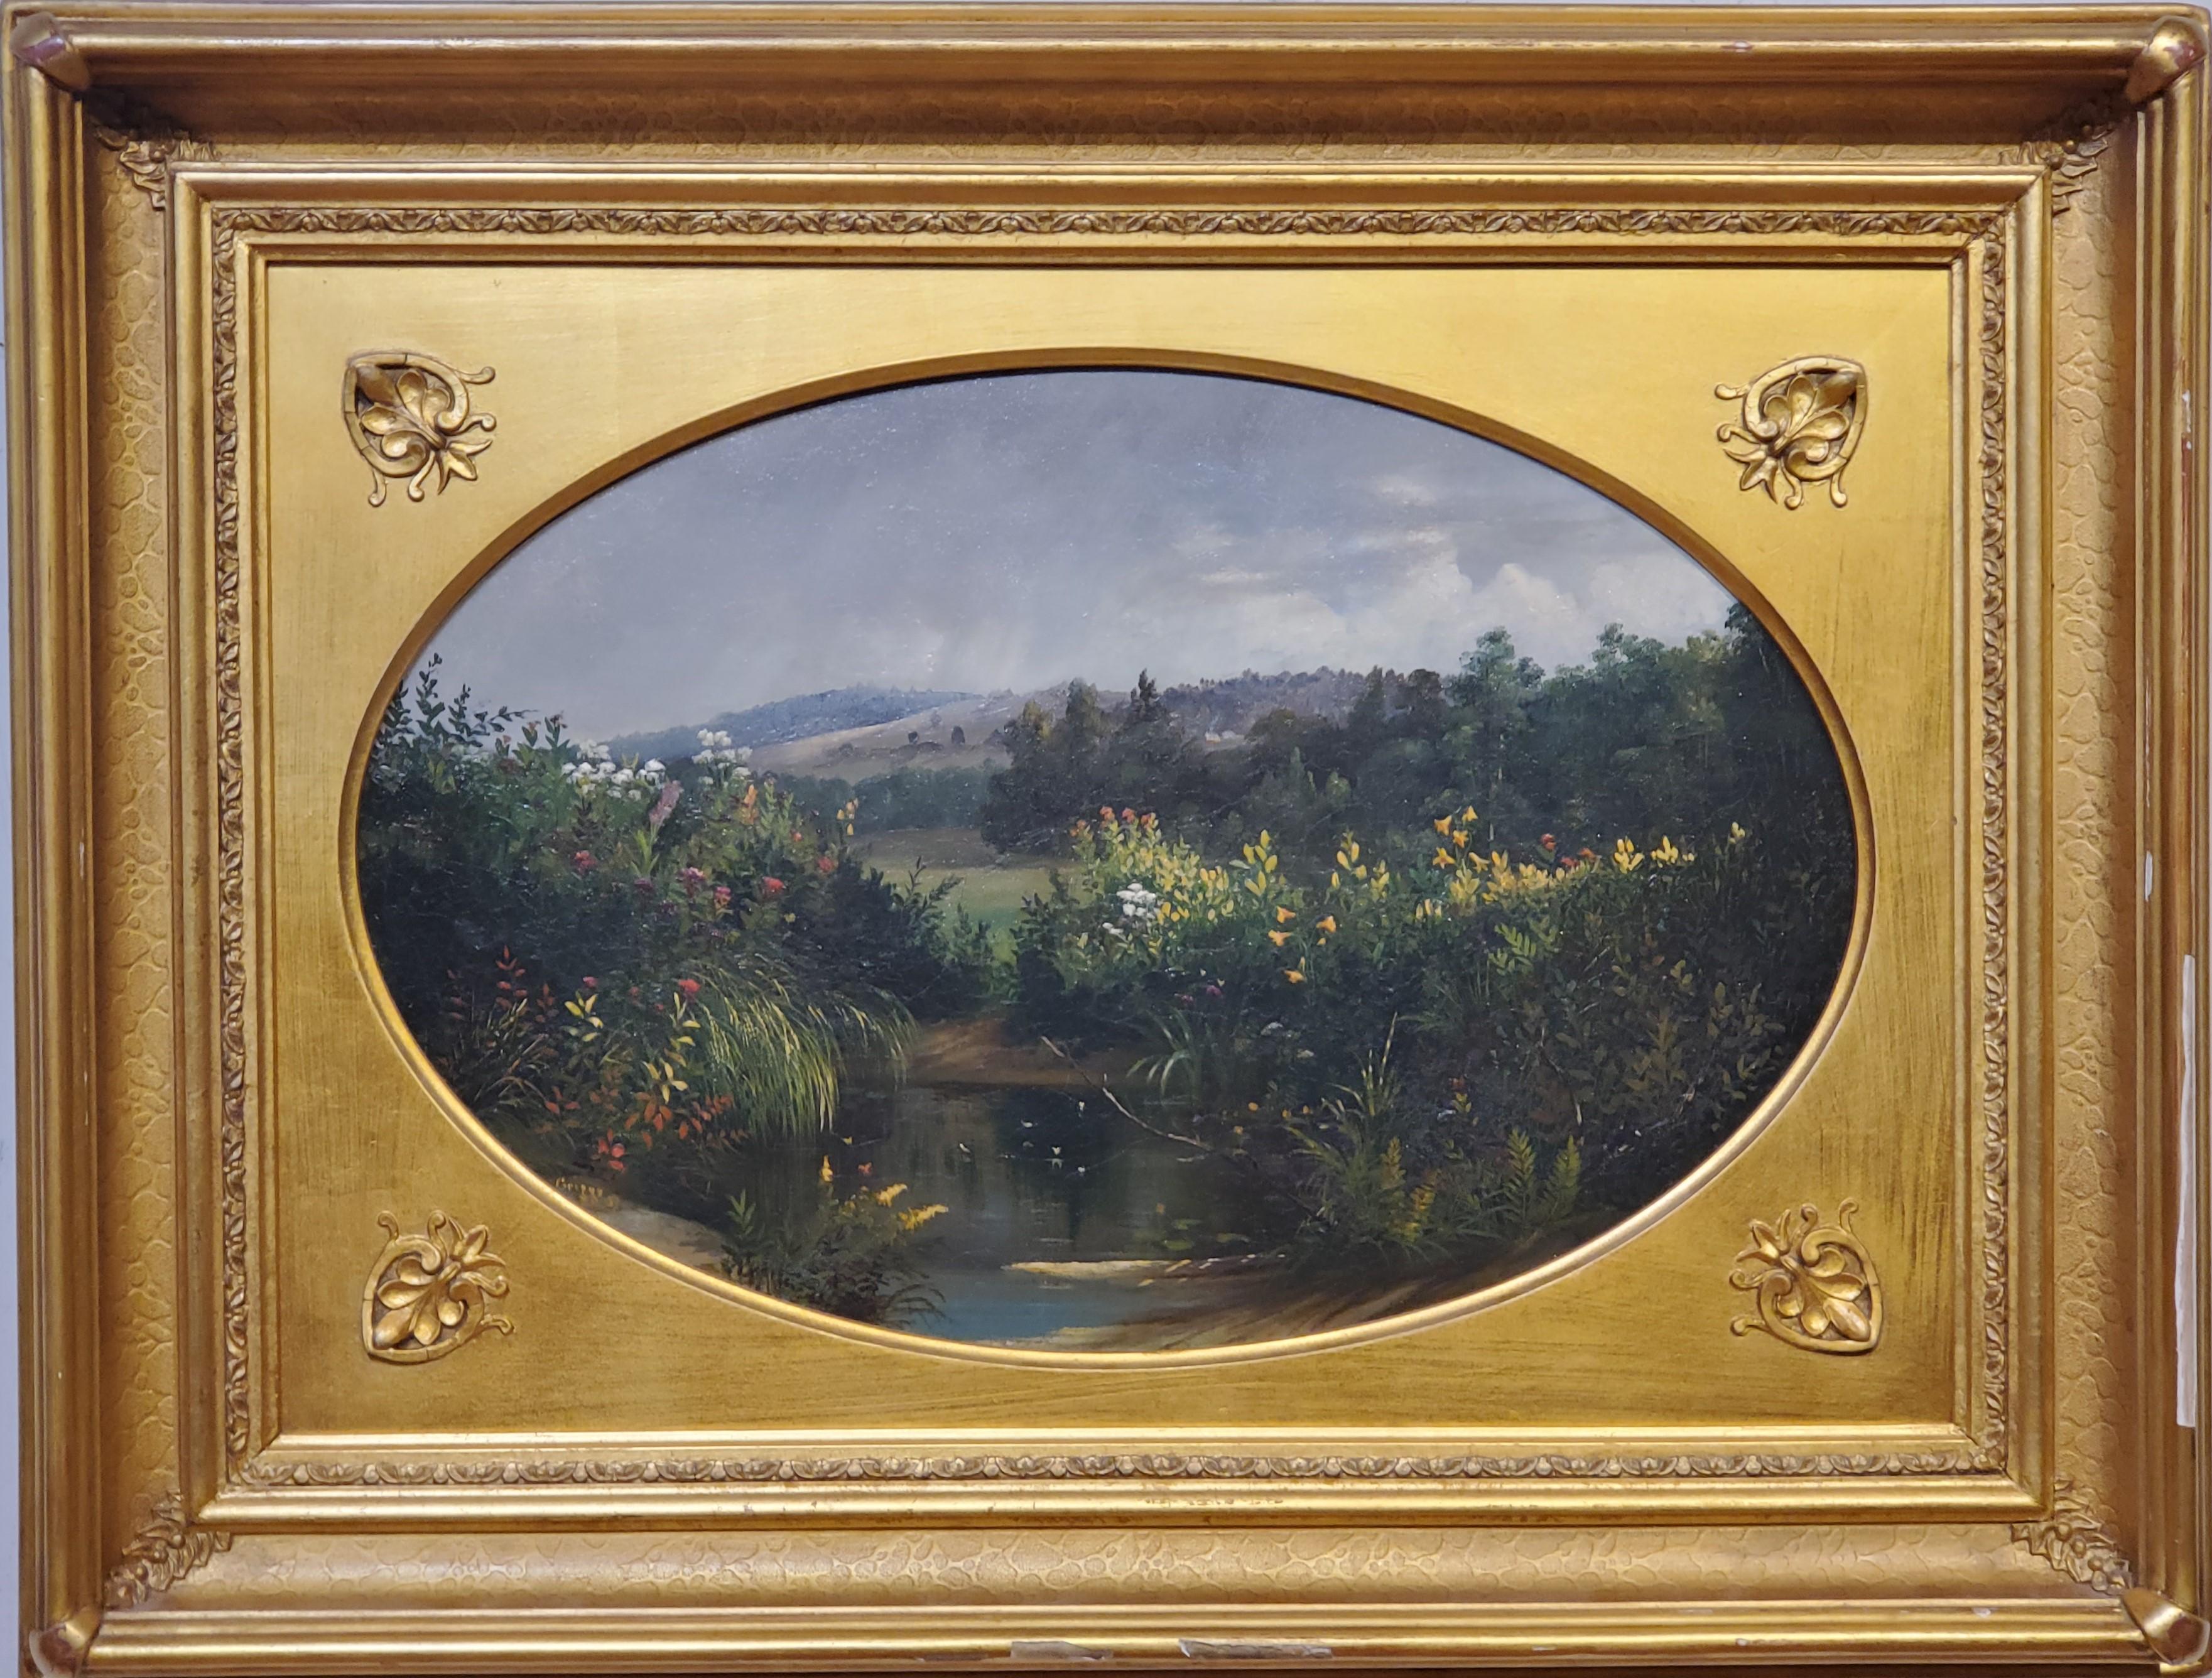 Oval landscape Study by Samuel Griggs

American 1827-1898

12.5" x 18.5" oval oil on board.

Framed signed and dated 1857.

New England landscape, likely New Hampshire.

Samuel W. Griggs, American (1827-1898) Griggs was listed as an architect in the